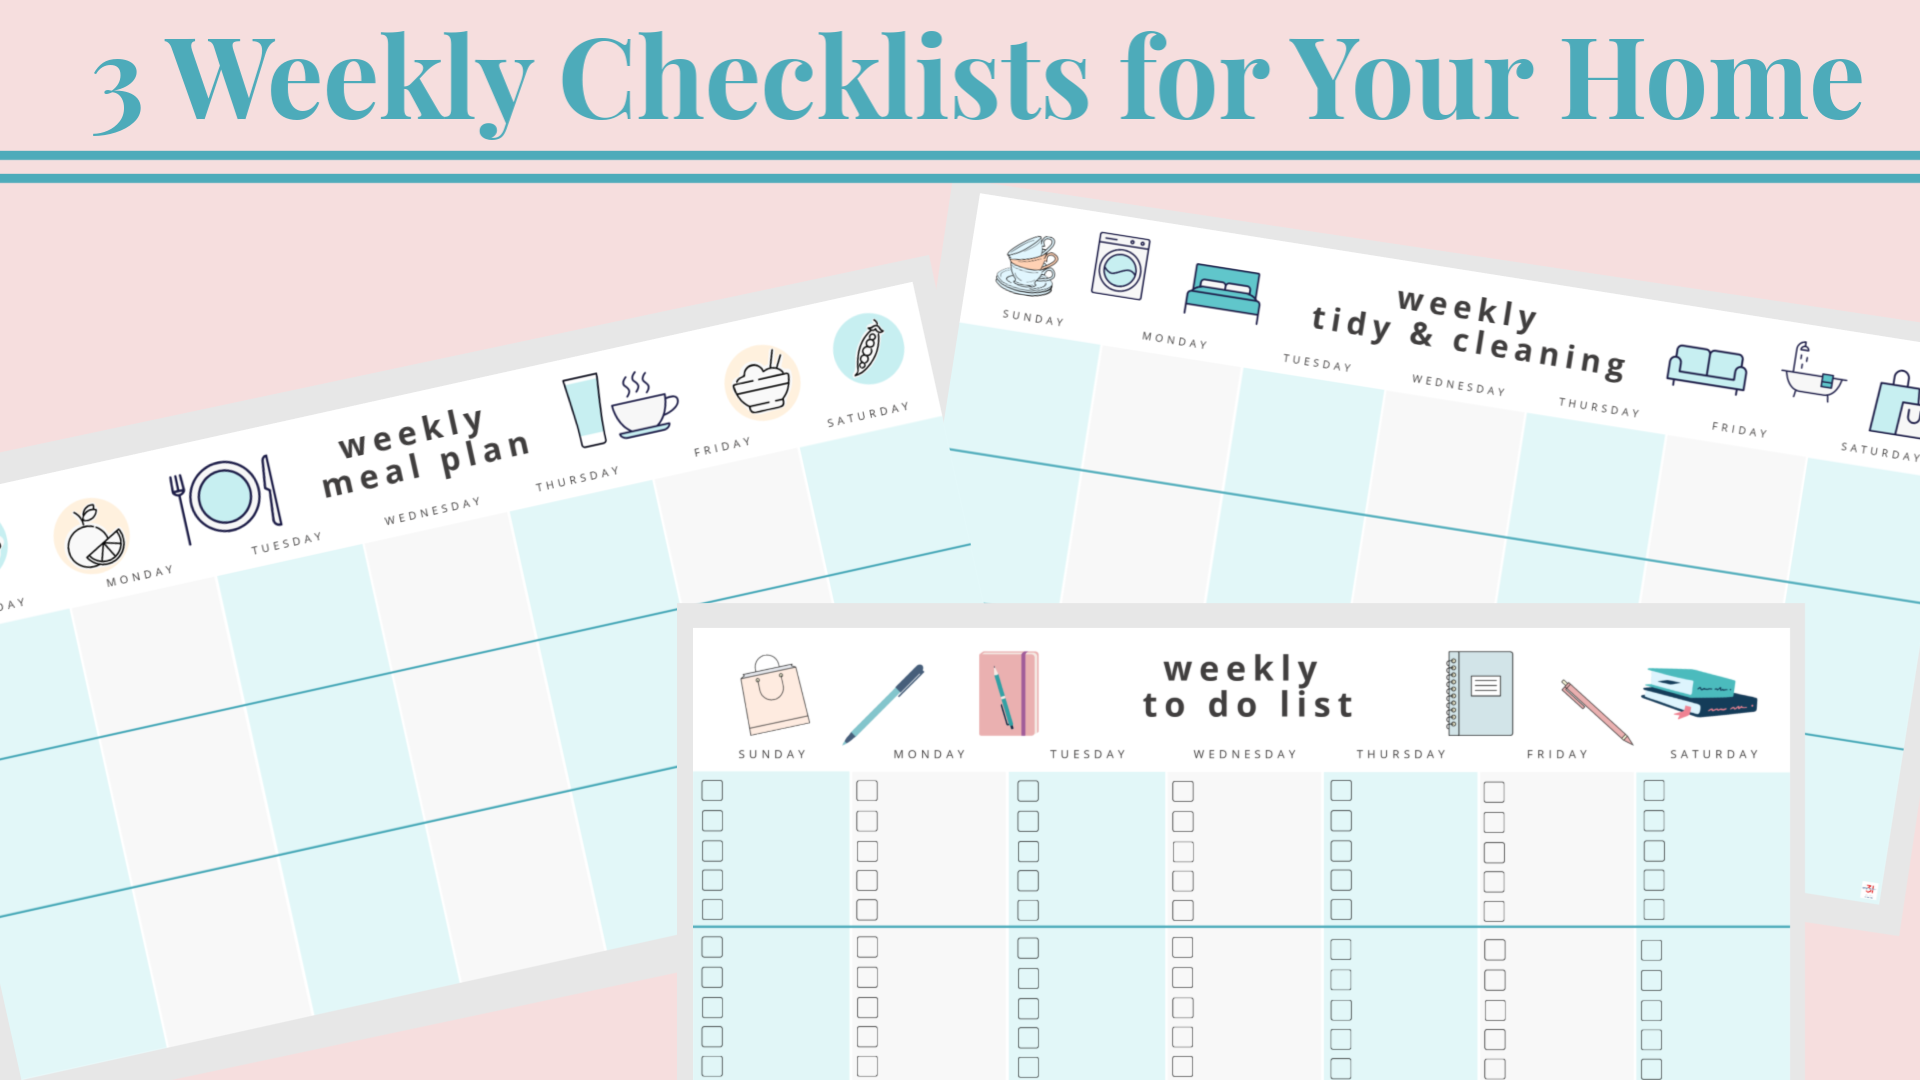 Keep track of household tasks with these Organized 31 Shop's printable checklists - 3 weekly options available: 3 Weekly Checklists for Your Home.